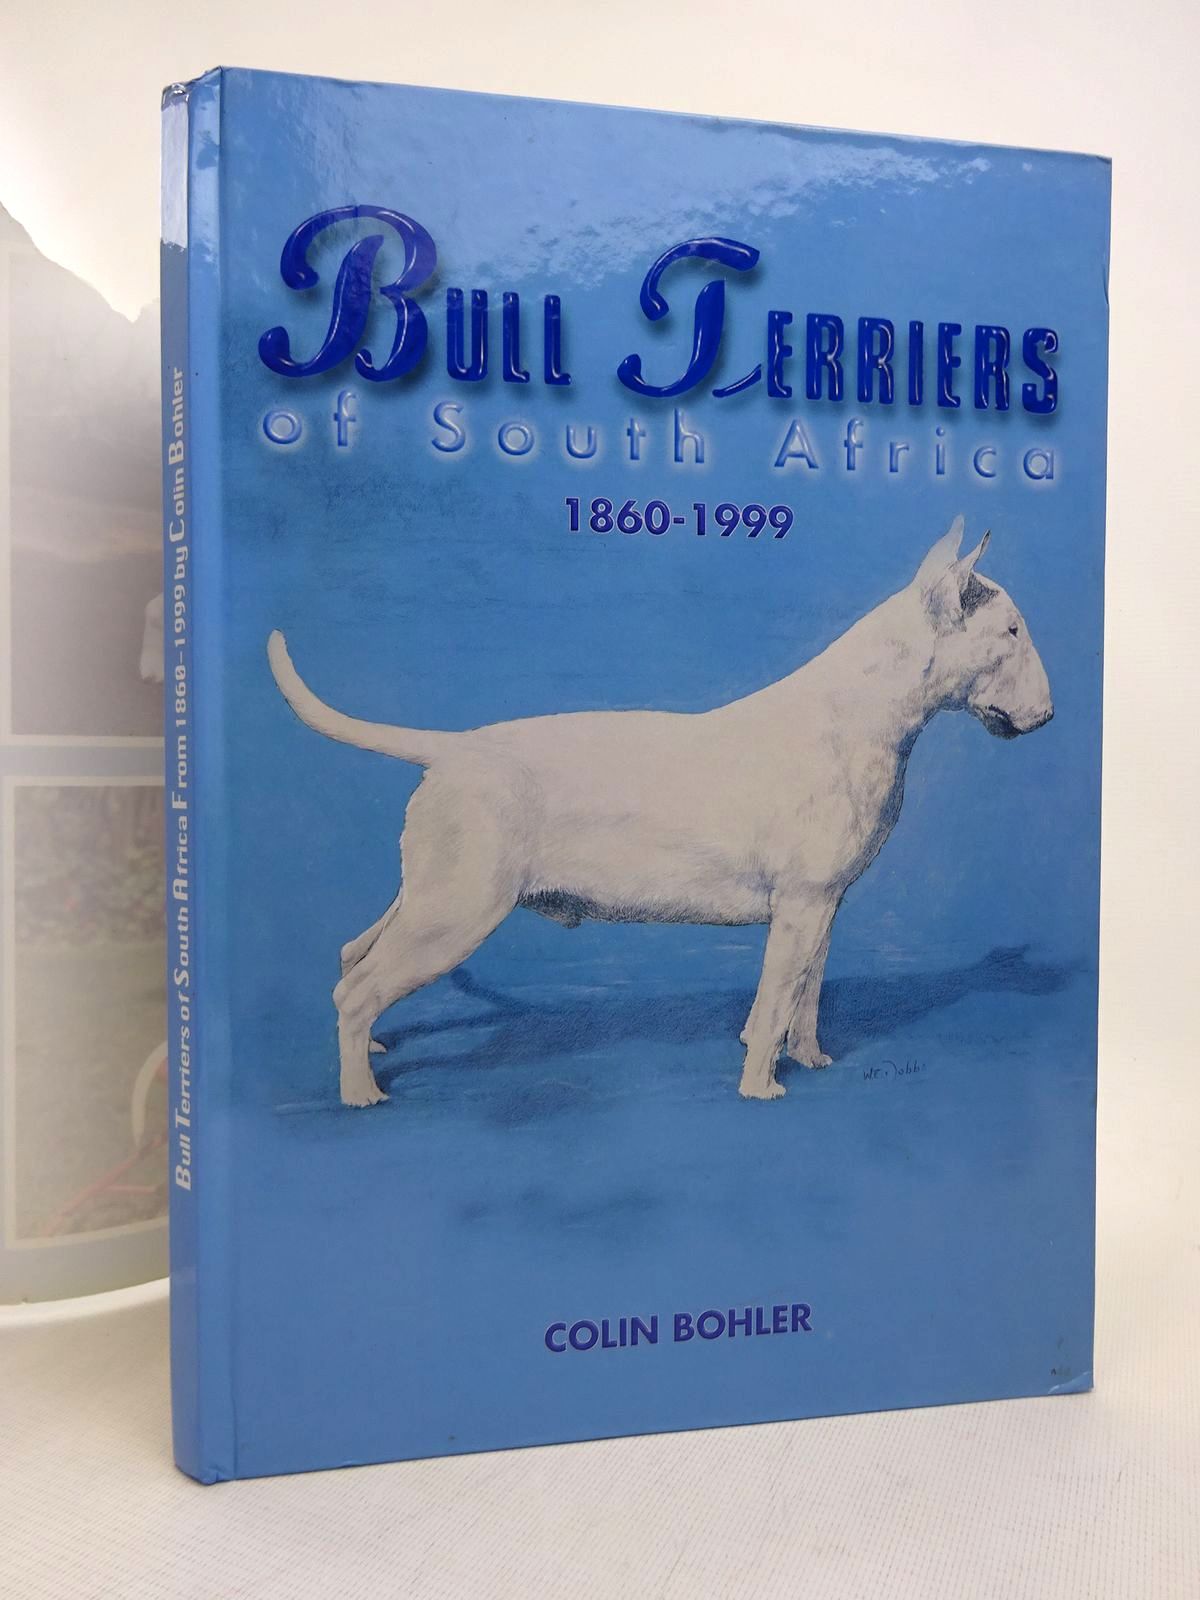 Photo of BULL TERRIERS OF SOUTH AFRICA 1860-1999 written by Bohler, Colin published by Sarah Bohler (STOCK CODE: 1816782)  for sale by Stella & Rose's Books